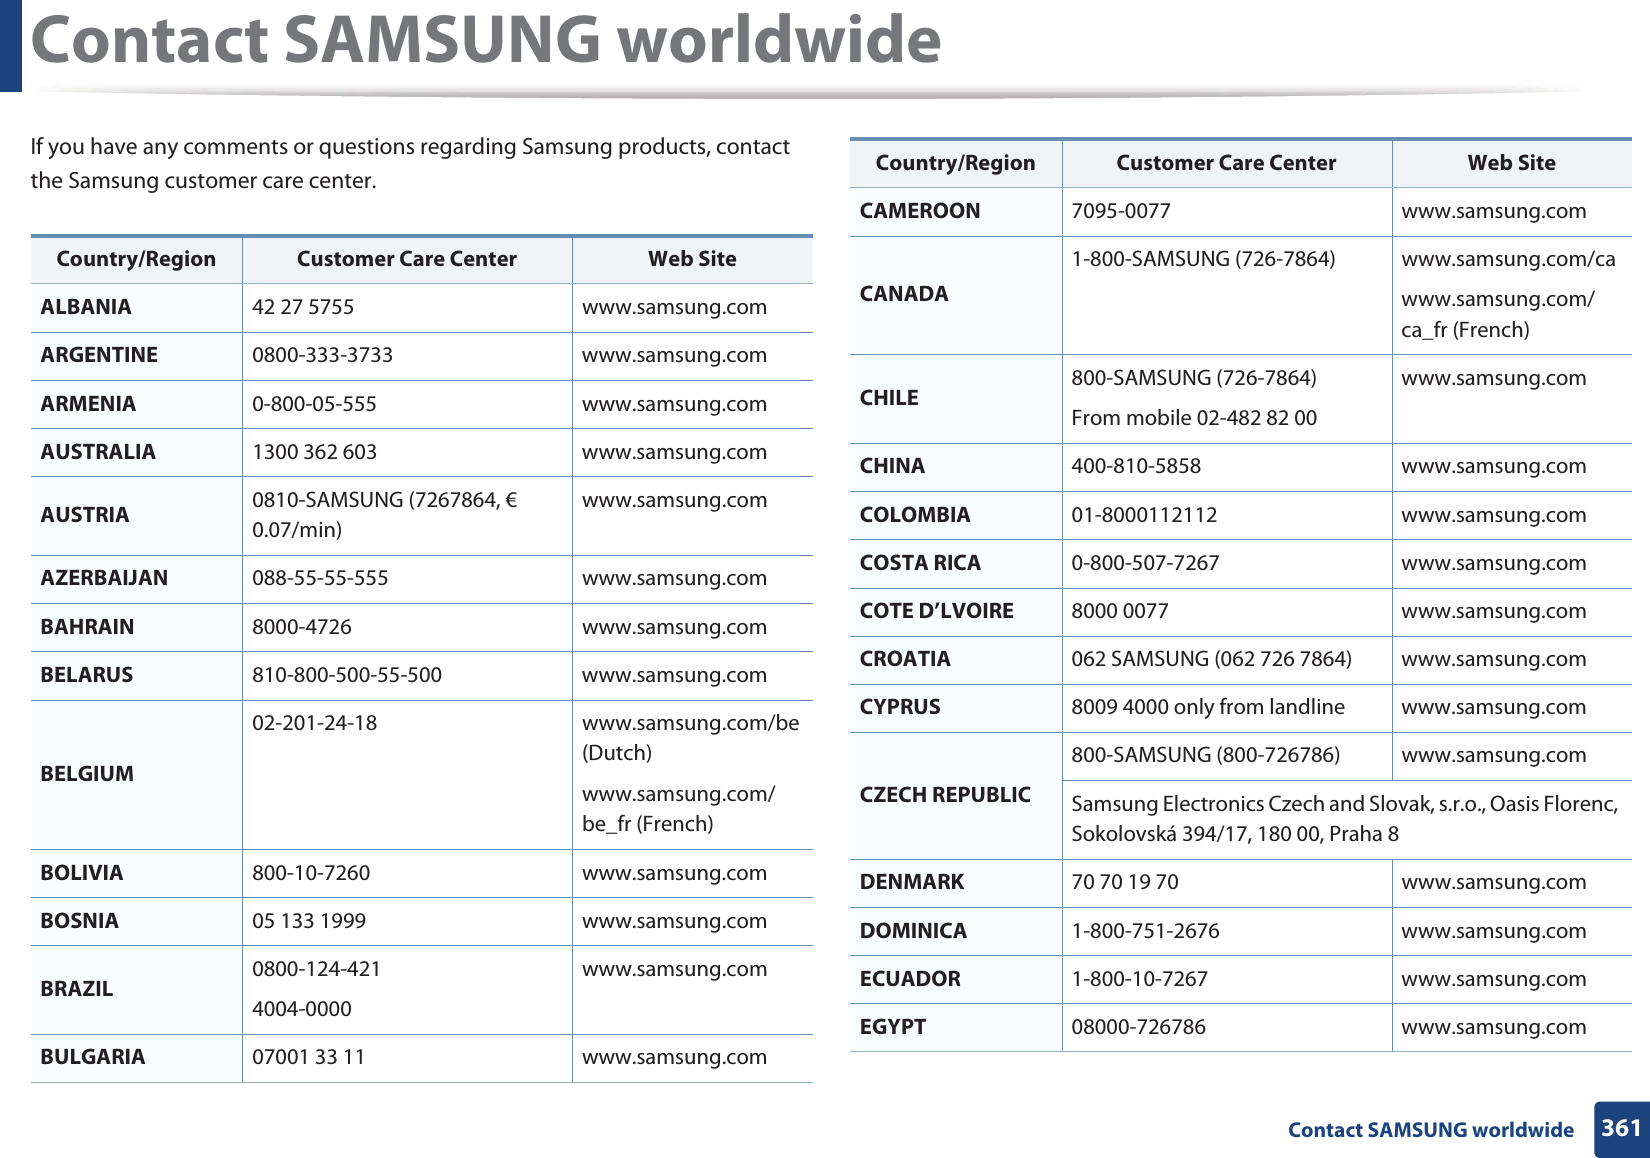 361 Contact SAMSUNG worldwideContact SAMSUNG worldwideIf you have any comments or questions regarding Samsung products, contact the Samsung customer care center.Country/Region Customer Care Center  Web SiteALBANIA 42 27 5755 www.samsung.comARGENTINE 0800-333-3733 www.samsung.comARMENIA 0-800-05-555 www.samsung.comAUSTRALIA 1300 362 603 www.samsung.comAUSTRIA 0810-SAMSUNG (7267864, € 0.07/min)www.samsung.comAZERBAIJAN 088-55-55-555 www.samsung.comBAHRAIN 8000-4726 www.samsung.comBELARUS 810-800-500-55-500 www.samsung.comBELGIUM02-201-24-18 www.samsung.com/be (Dutch)www.samsung.com/be_fr (French)BOLIVIA 800-10-7260 www.samsung.comBOSNIA 05 133 1999 www.samsung.comBRAZIL 0800-124-4214004-0000www.samsung.comBULGARIA 07001 33 11 www.samsung.comCAMEROON 7095-0077 www.samsung.comCANADA1-800-SAMSUNG (726-7864) www.samsung.com/cawww.samsung.com/ca_fr (French)CHILE 800-SAMSUNG (726-7864)From mobile 02-482 82 00www.samsung.comCHINA 400-810-5858 www.samsung.comCOLOMBIA 01-8000112112 www.samsung.comCOSTA RICA 0-800-507-7267 www.samsung.comCOTE D’LVOIRE 8000 0077 www.samsung.comCROATIA 062 SAMSUNG (062 726 7864) www.samsung.comCYPRUS 8009 4000 only from landline www.samsung.comCZECH REPUBLIC800-SAMSUNG (800-726786) www.samsung.comSamsung Electronics Czech and Slovak, s.r.o., Oasis Florenc, Sokolovská 394/17, 180 00, Praha 8DENMARK 70 70 19 70 www.samsung.comDOMINICA 1-800-751-2676 www.samsung.comECUADOR 1-800-10-7267 www.samsung.comEGYPT 08000-726786 www.samsung.comCountry/Region Customer Care Center  Web Site